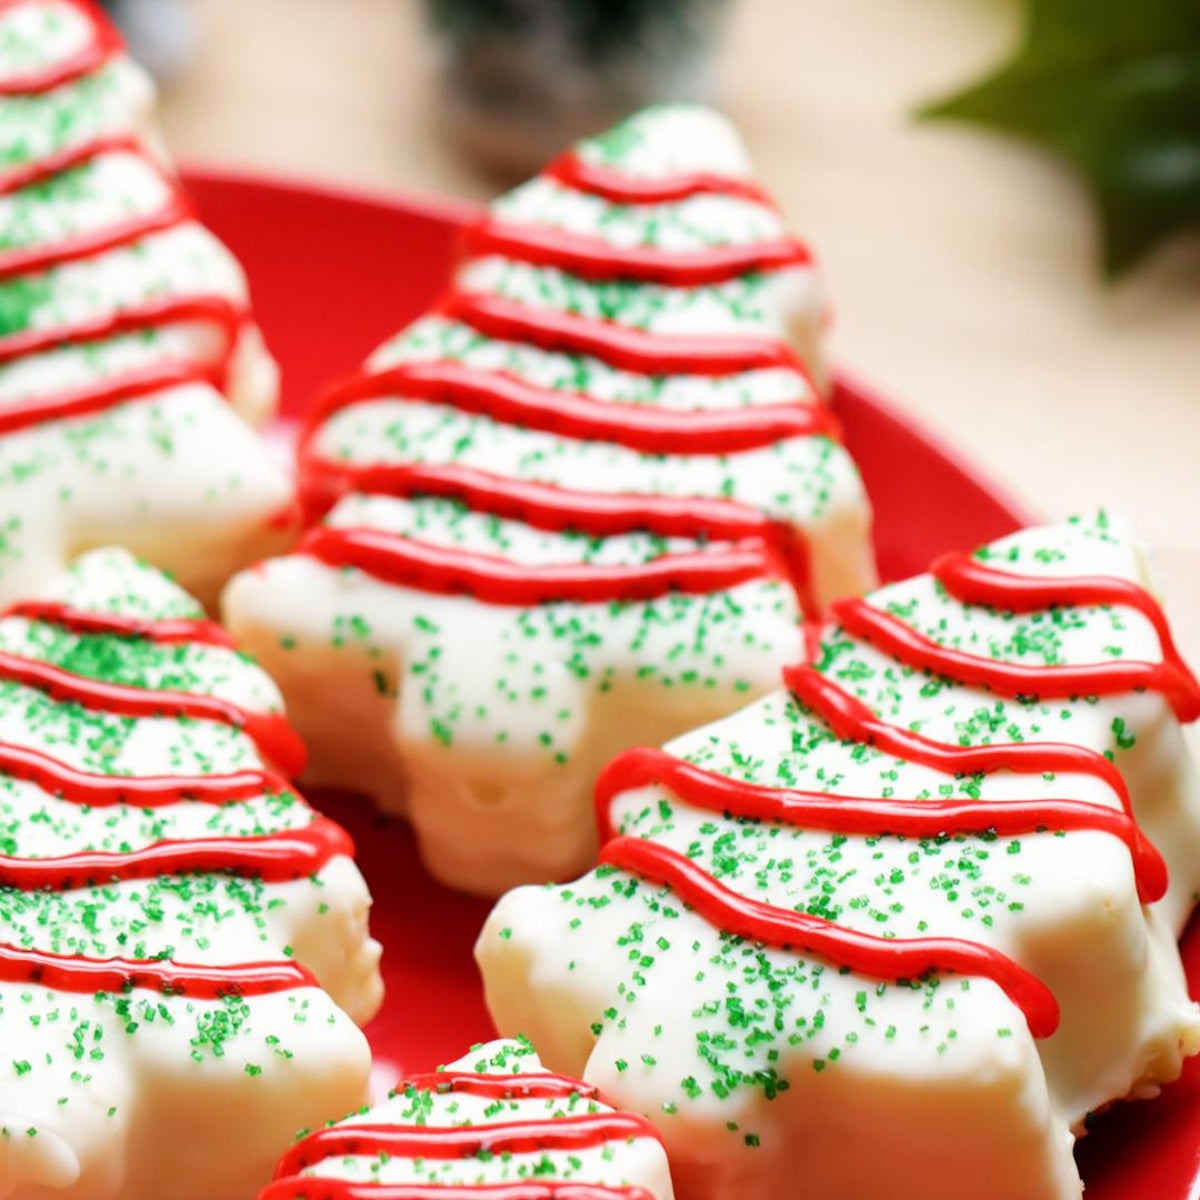 Little Debbie-Inspired Christmas Tree Cakes Recipe by Tasty